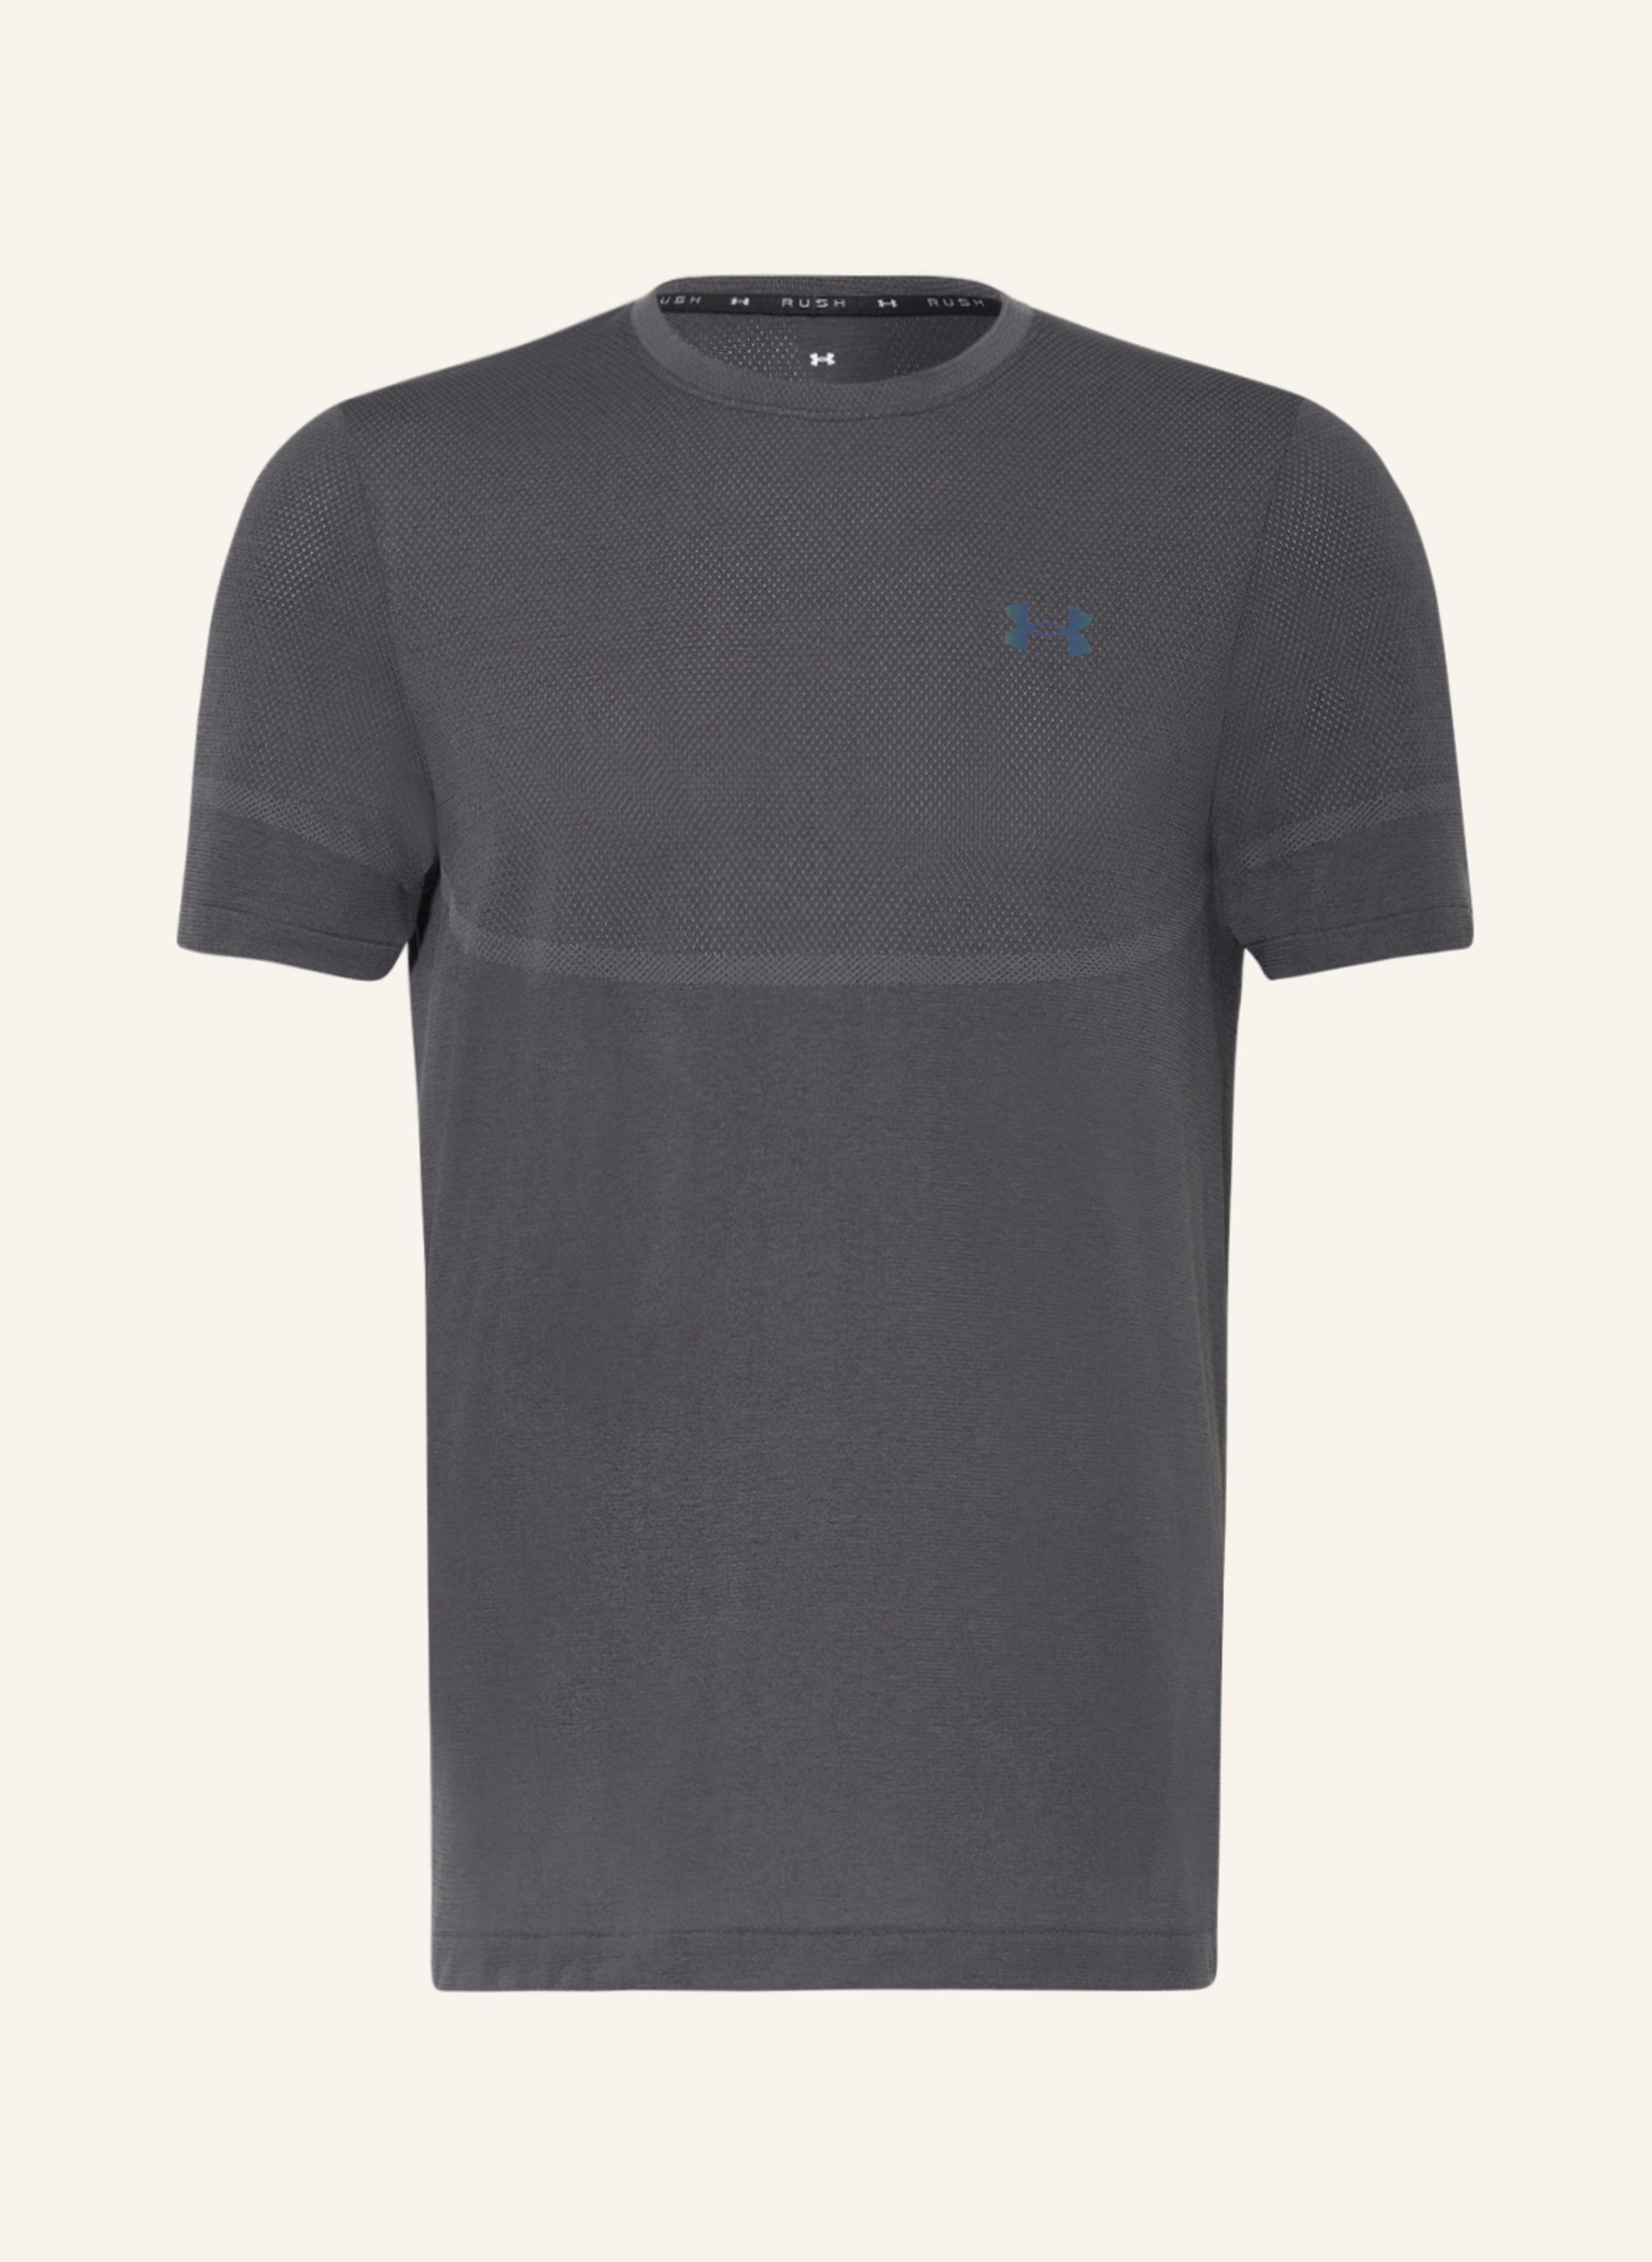 UNDER ARMOUR T-shirt RUSH™ SEAMLESS LEGACY with mesh in dark gray